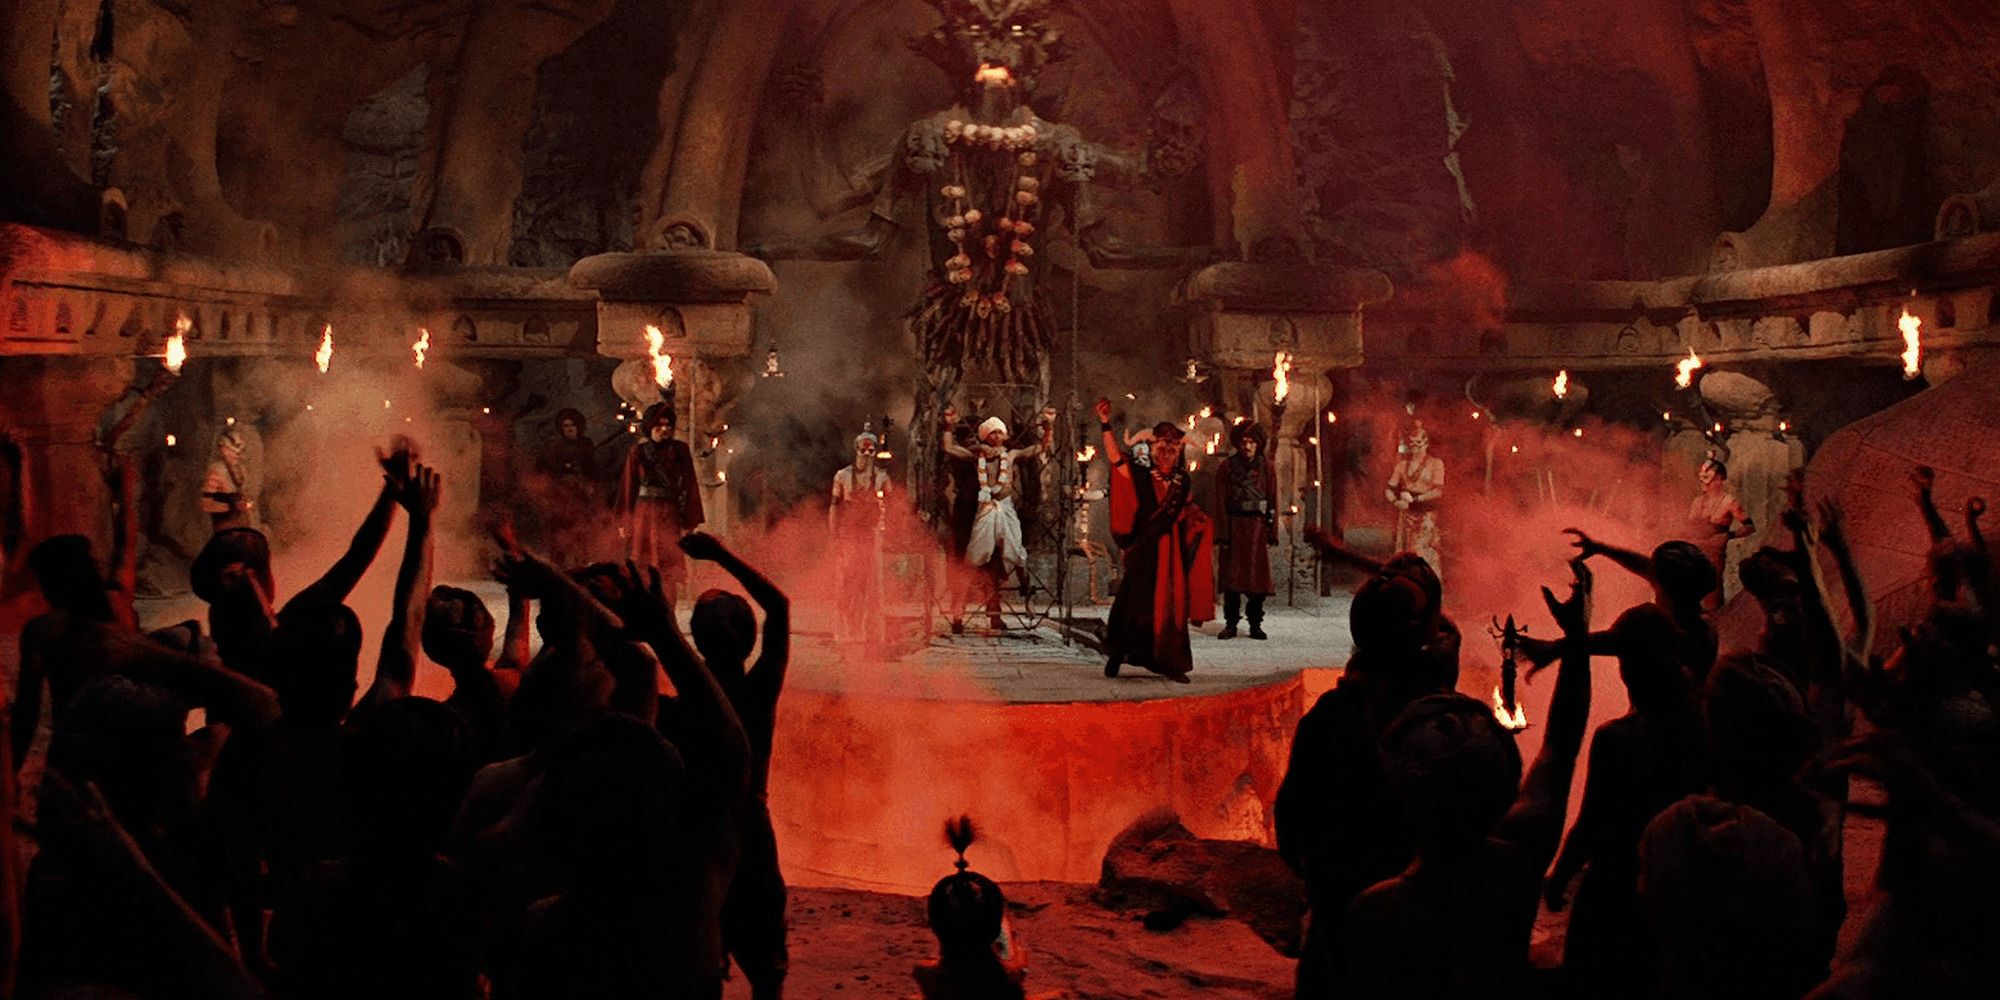 Crowd Witnesses Dark Ritual at Pagan Temple in 'Indiana Jones and the Temple of Doom'